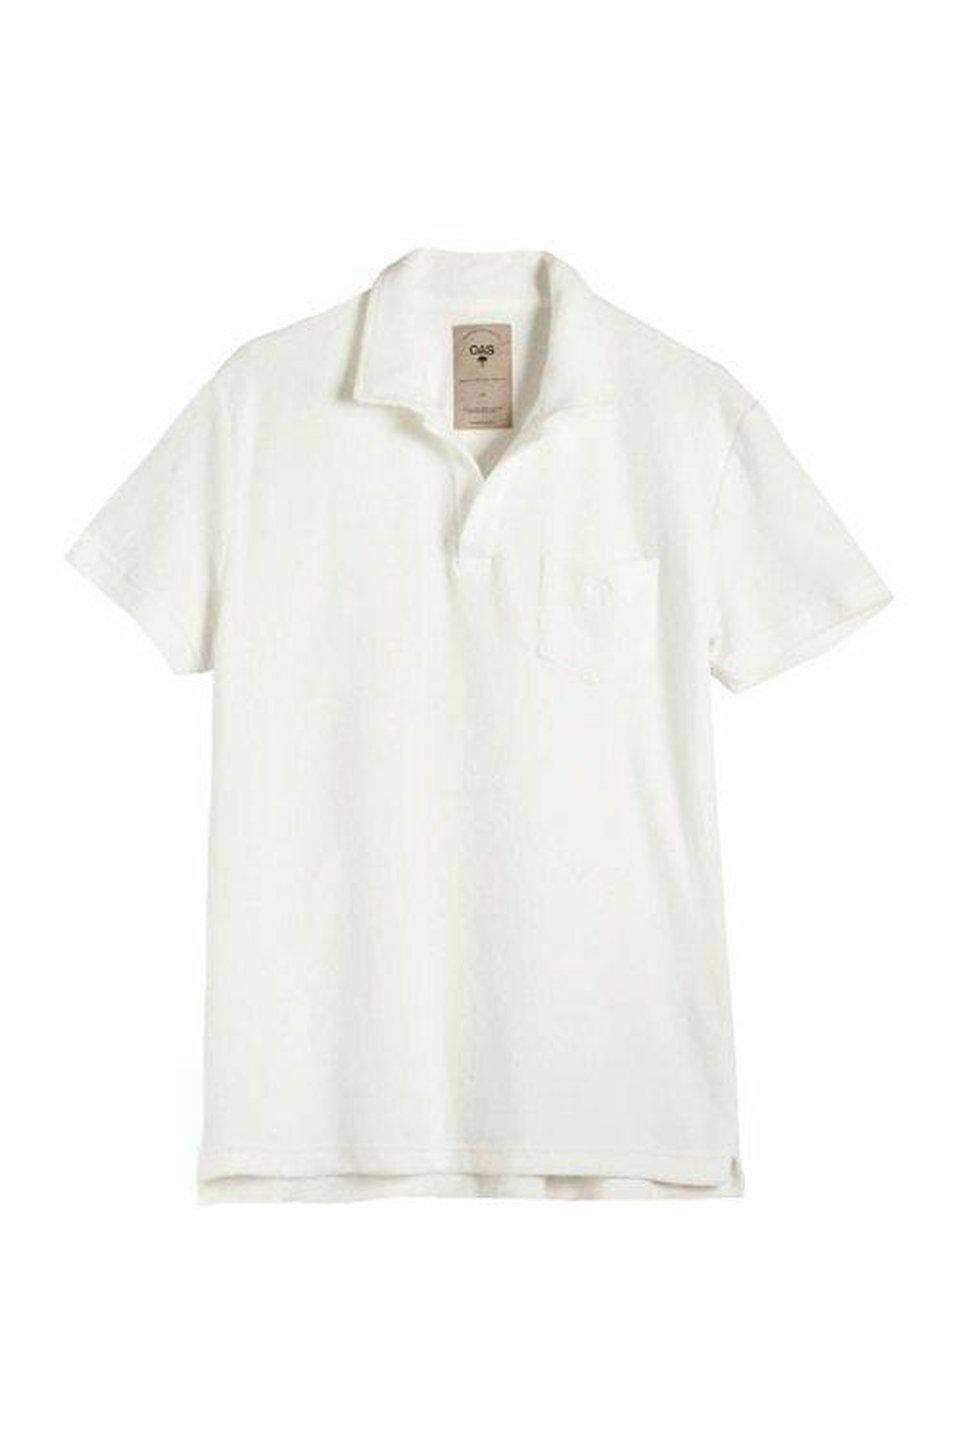 OAS Solid White Terry Shirt